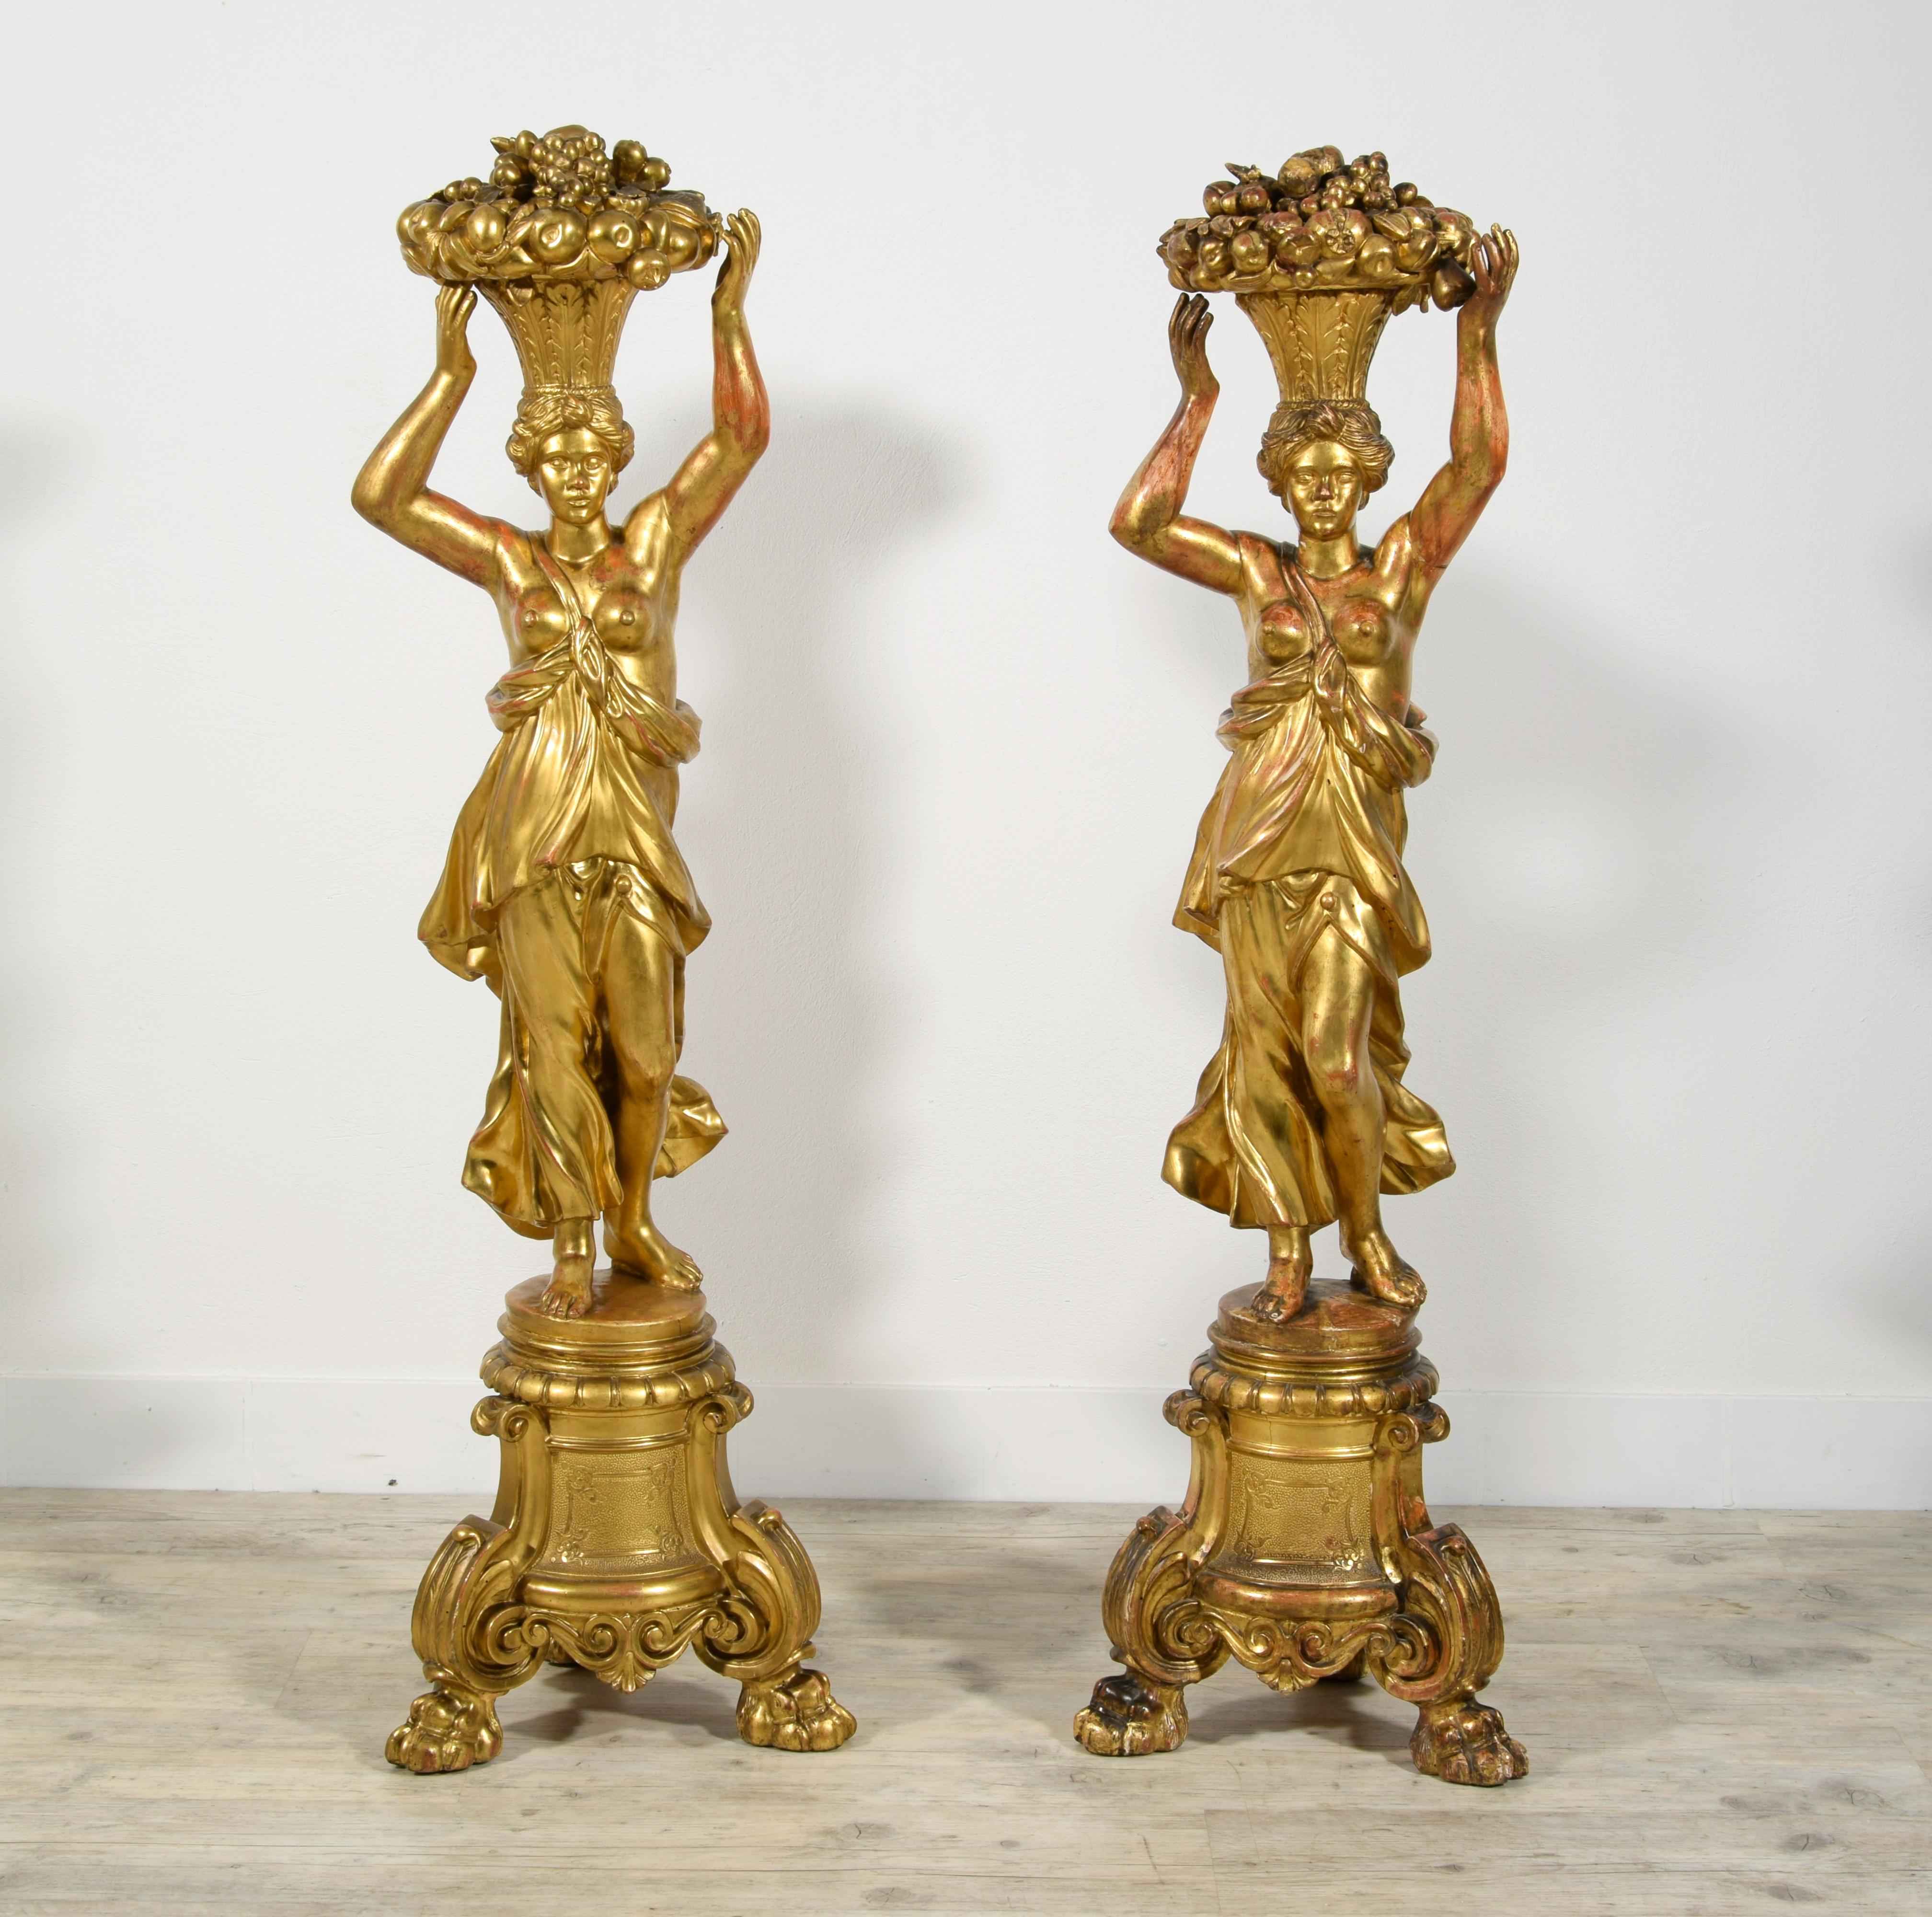 18th Century, Pair of Italian neoclassical giltwood sculpture with african woman holding baske

These particular and rare sculptures, made in the Genoa area (Italy) towards the end of the eighteenth century, are representative of the taste